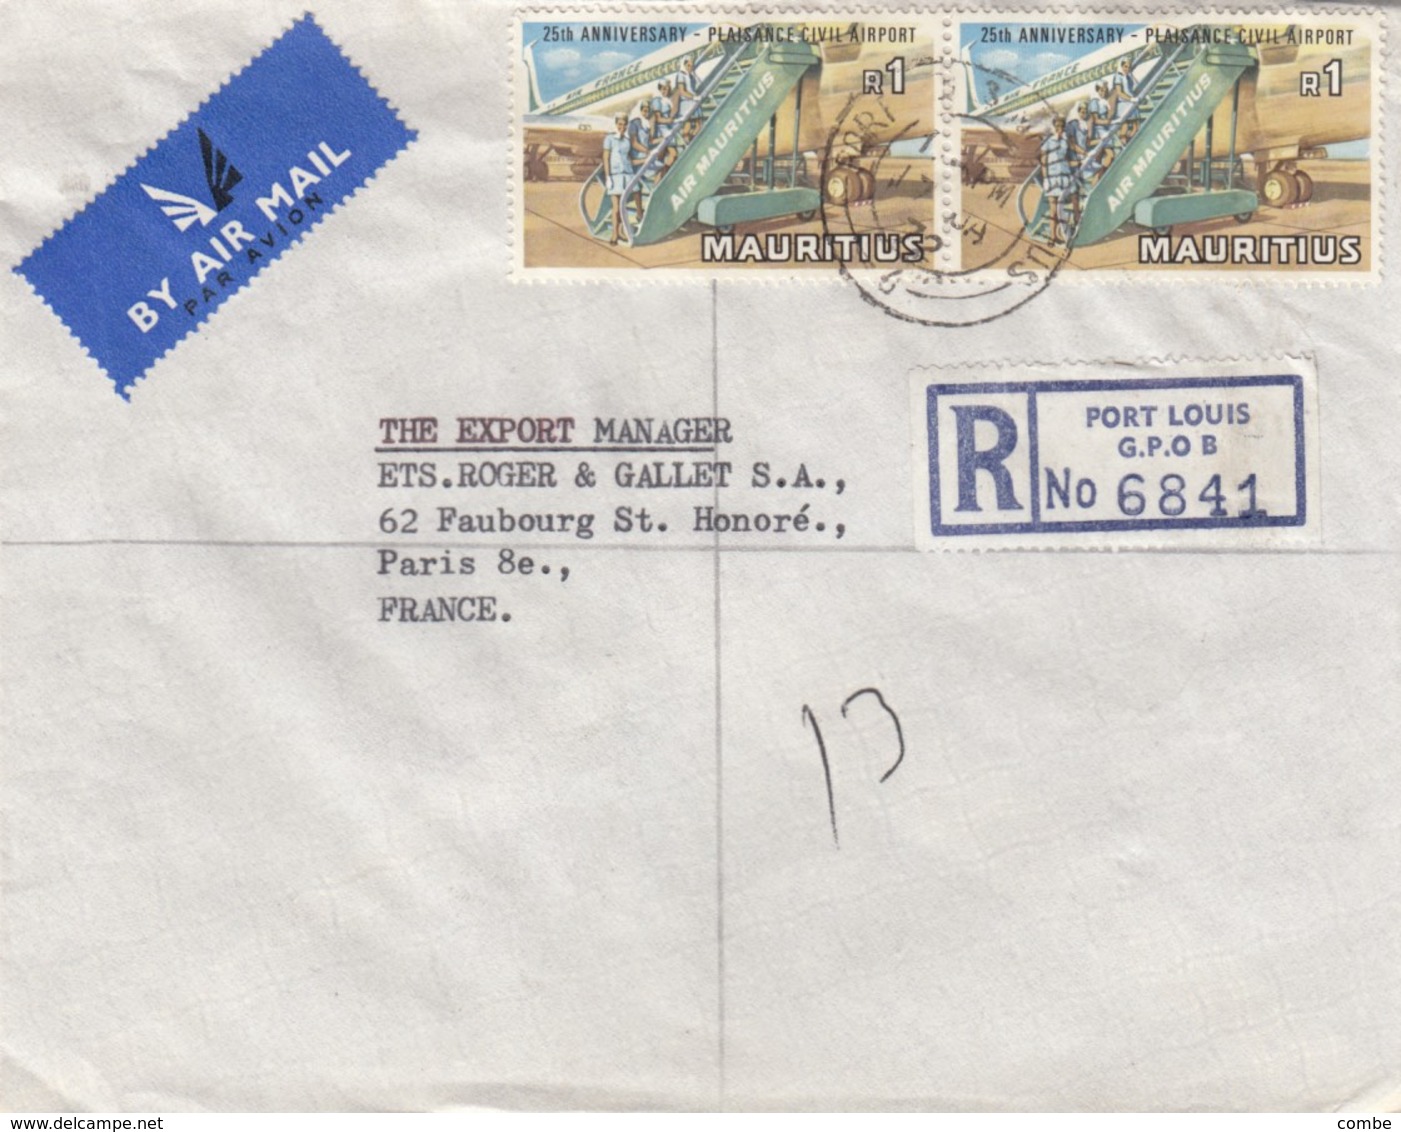 MAURTIUS REGISTERED COVER PORT LOUIS TO FRANCE - Mauritius (1968-...)